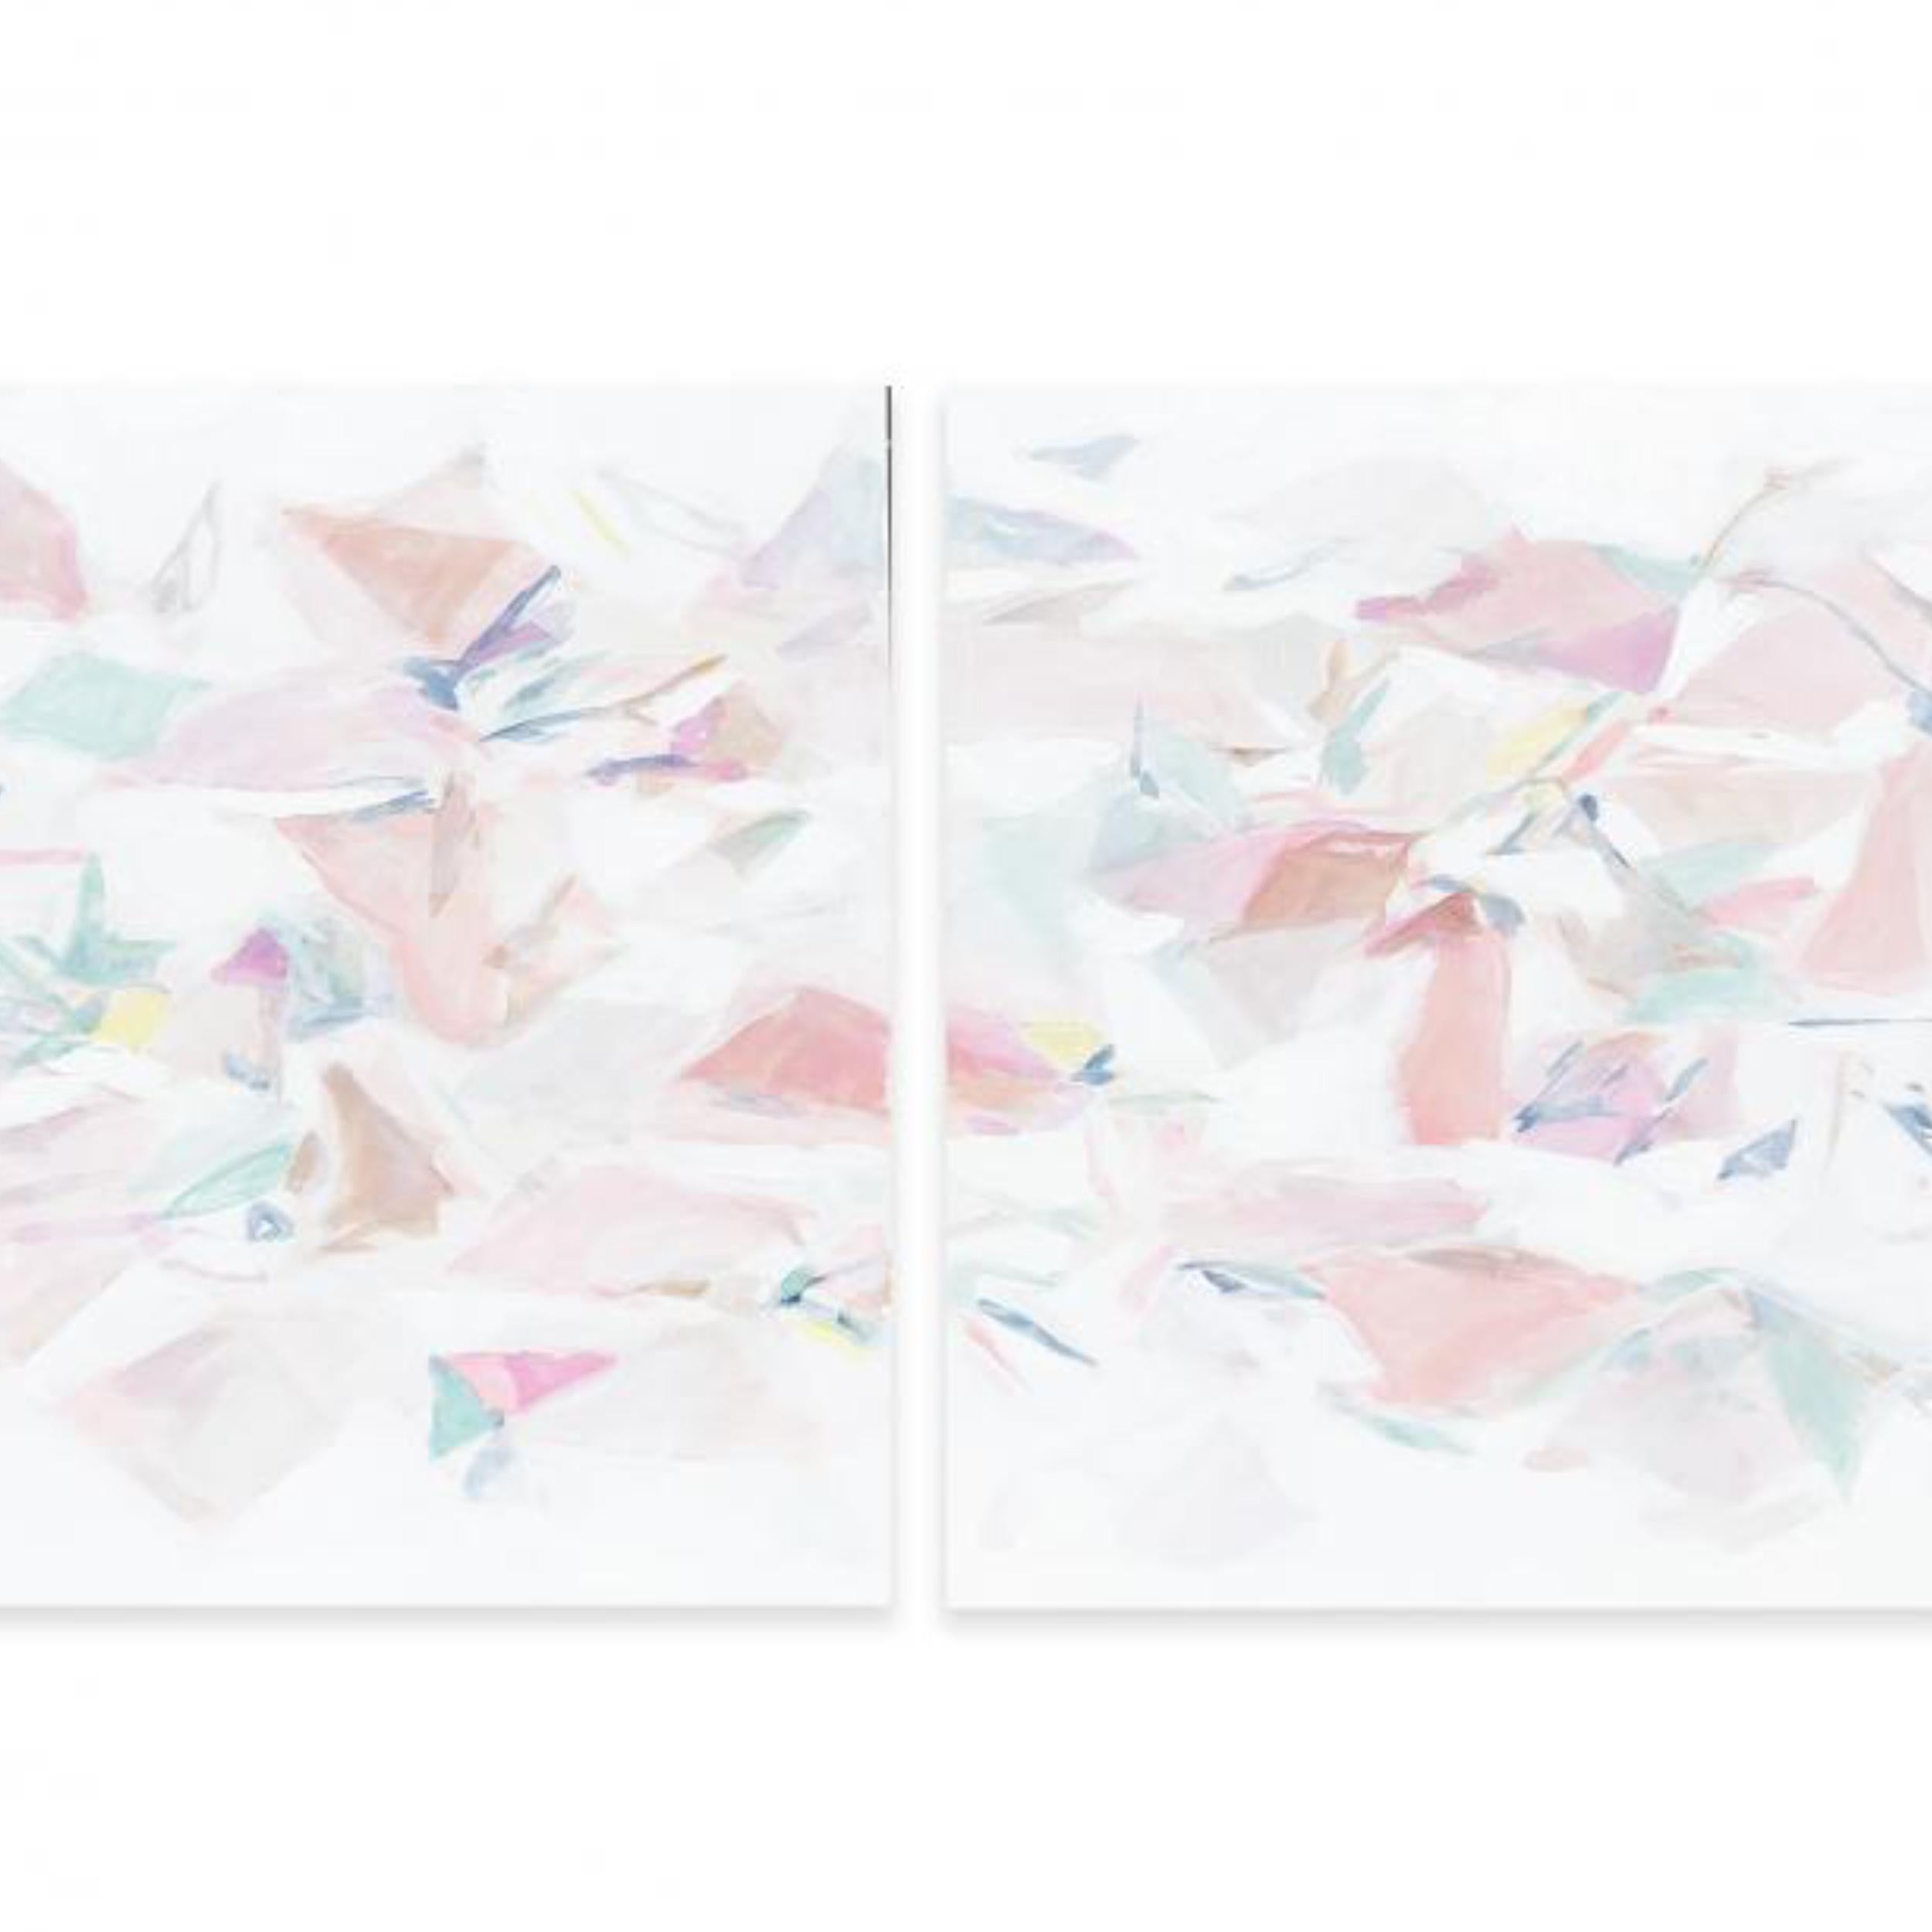 FALLING IV (DIPTYCH) – Painting von Taelor Fisher